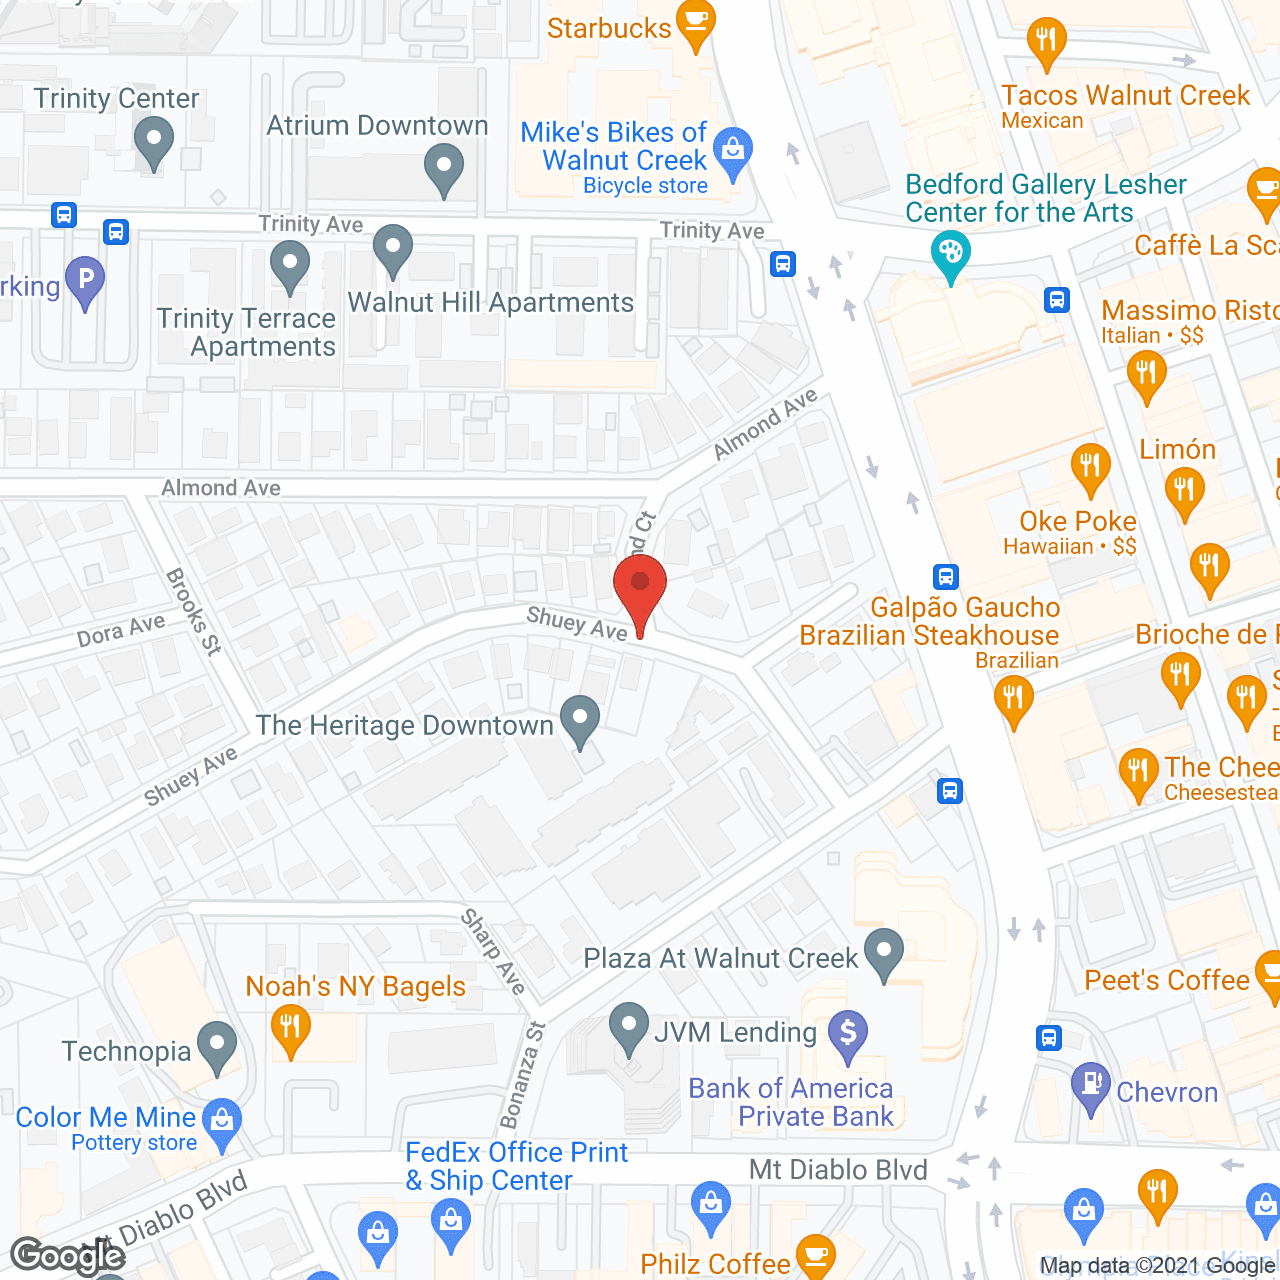 The Heritage Downtown in google map